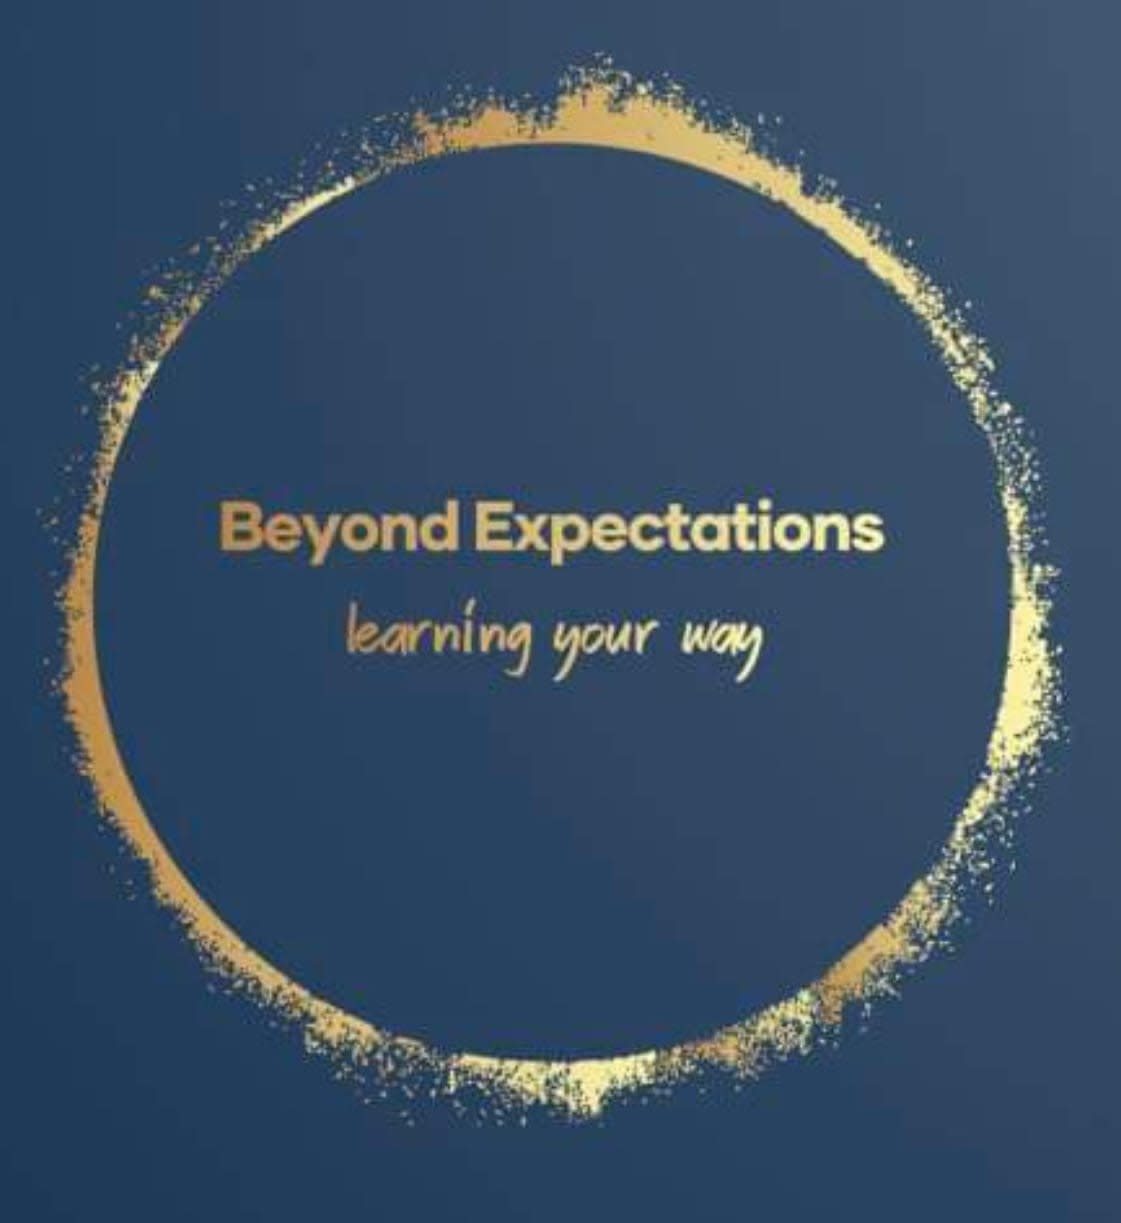 Beyond Expectations - Learning Your Way